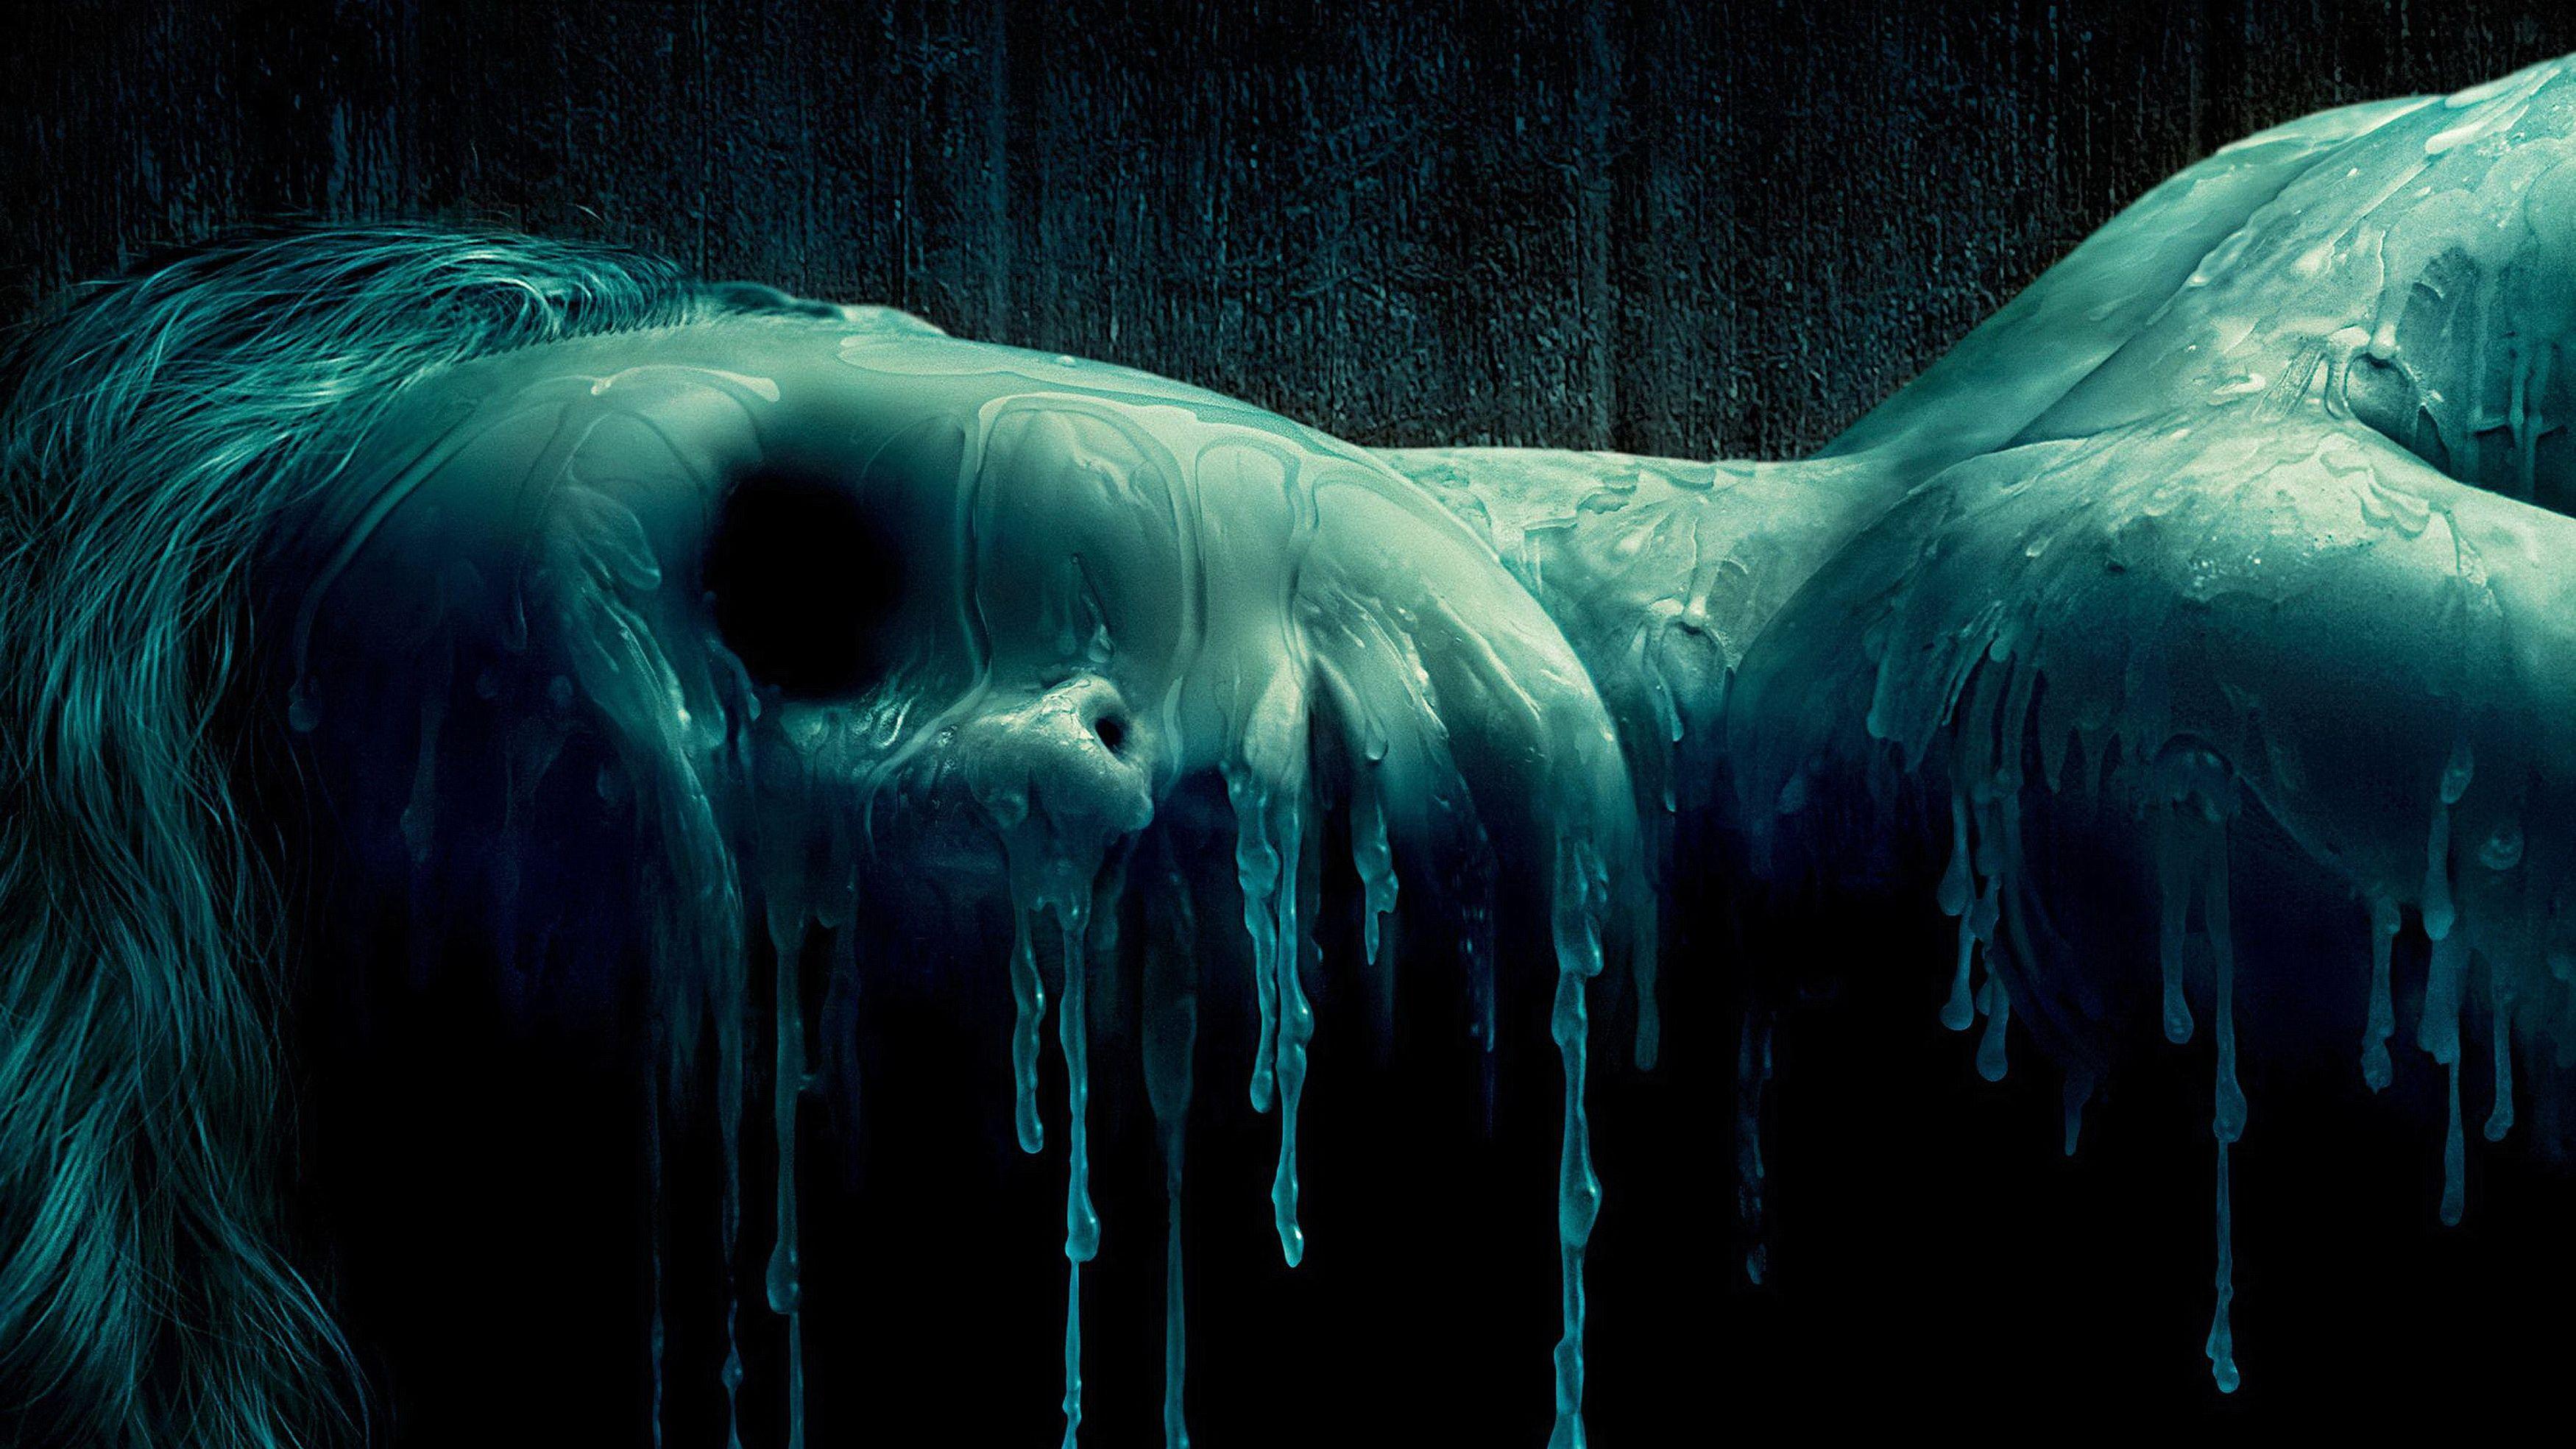 Wallpaper House of Wax, Horror, Thriller, HD, Movies / Editor's